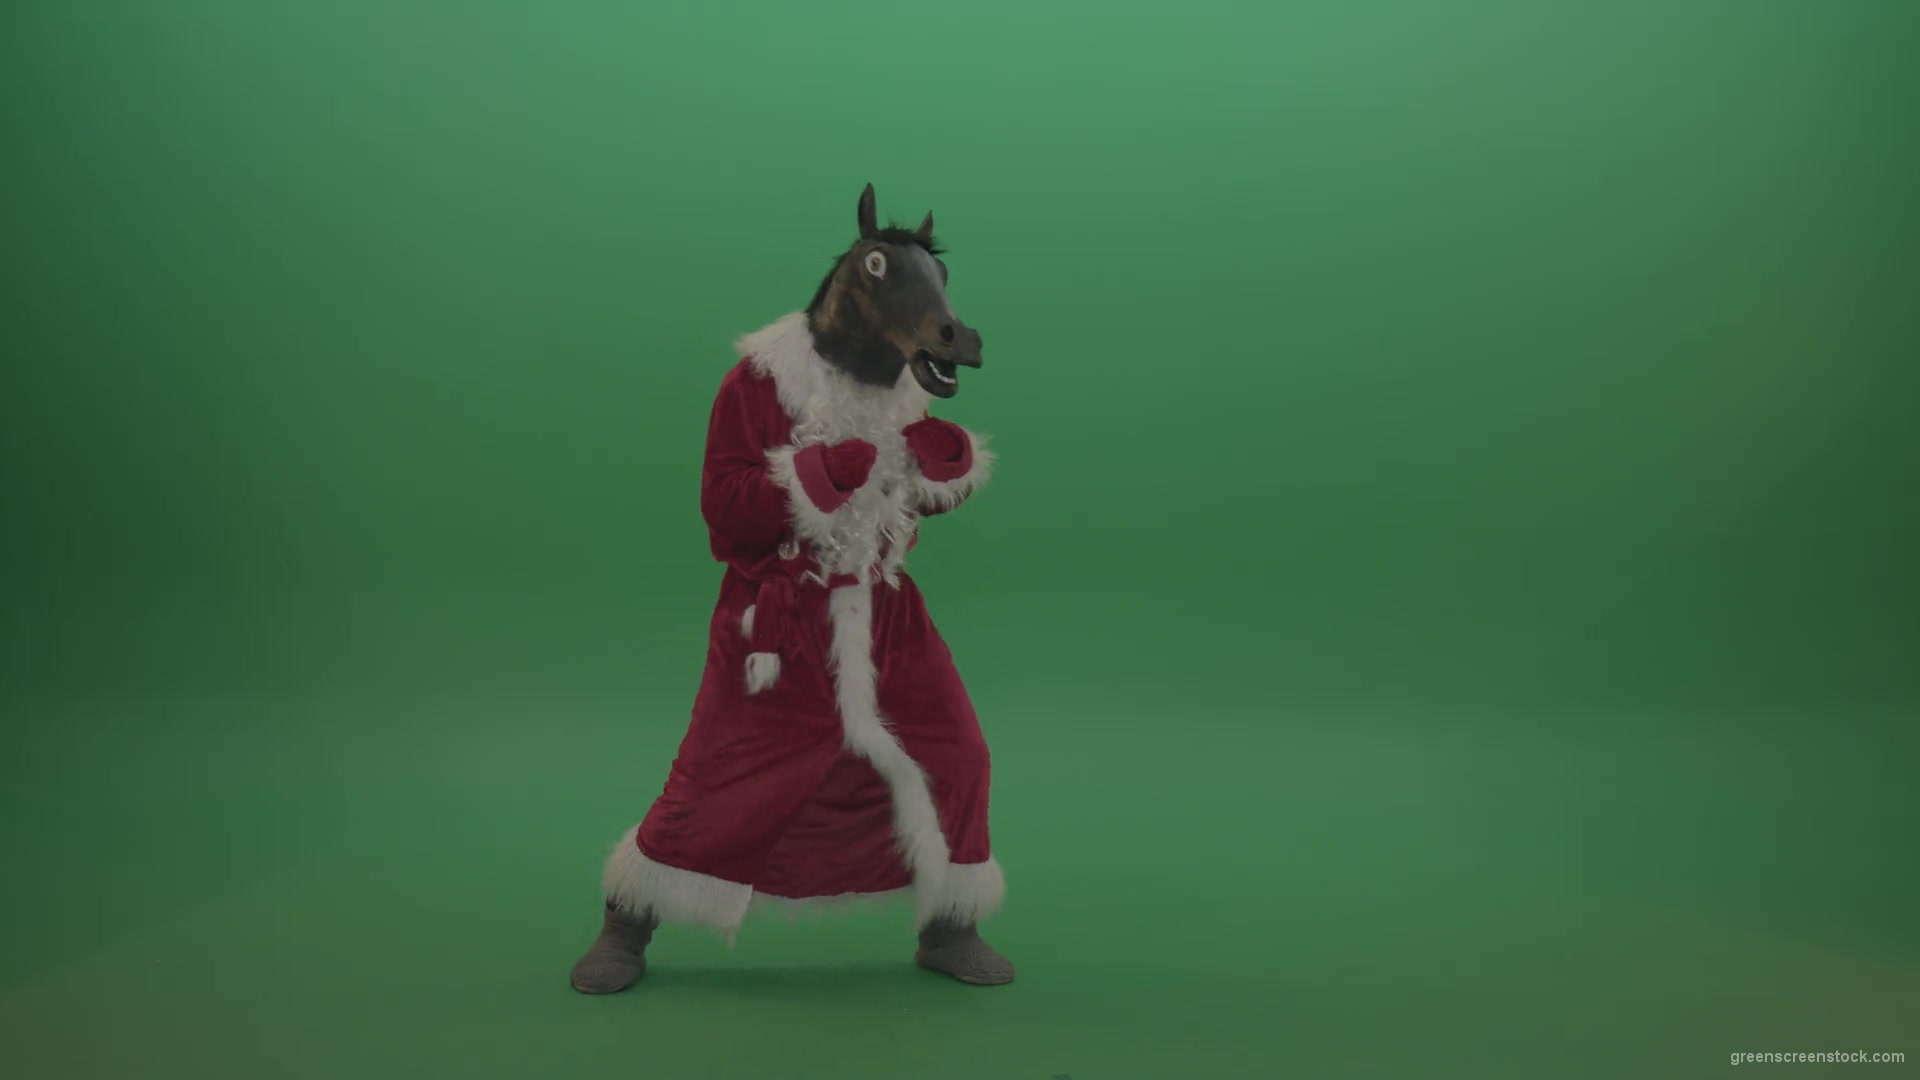 Horse-head-santa-displays-his-fight-techniques-over-chromakey-background-1920_009 Green Screen Stock